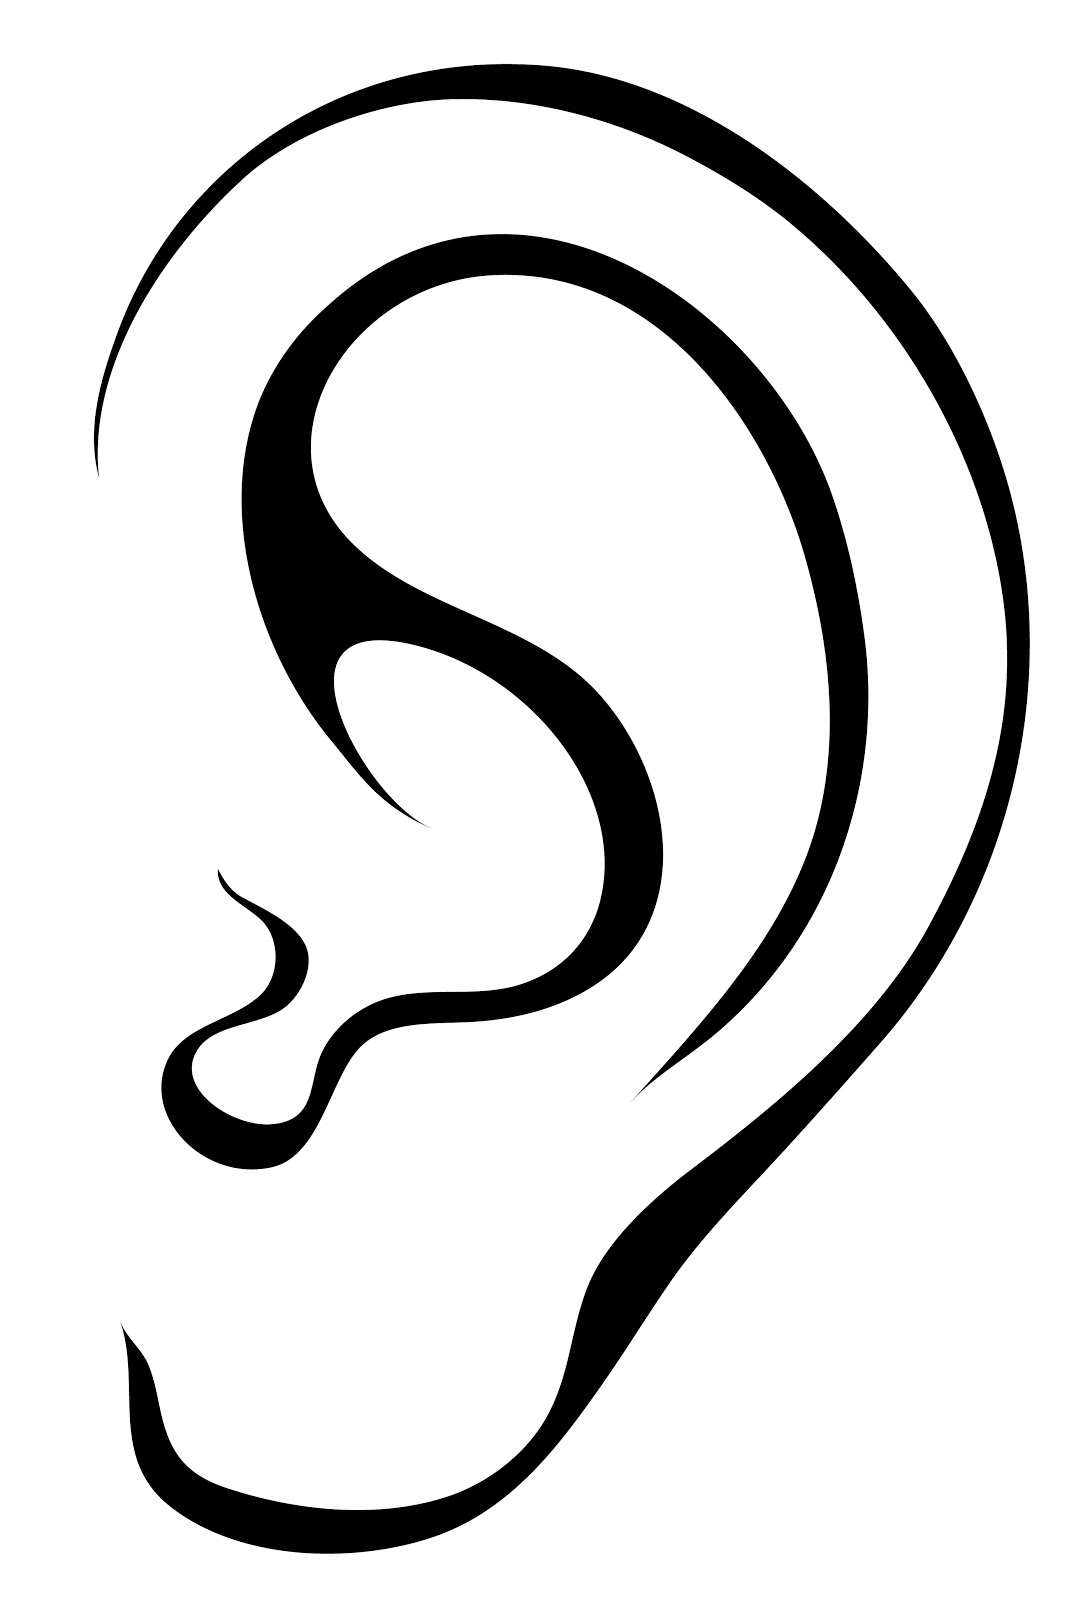 Listening Ear Images Clipart Panda Free Clipart Images